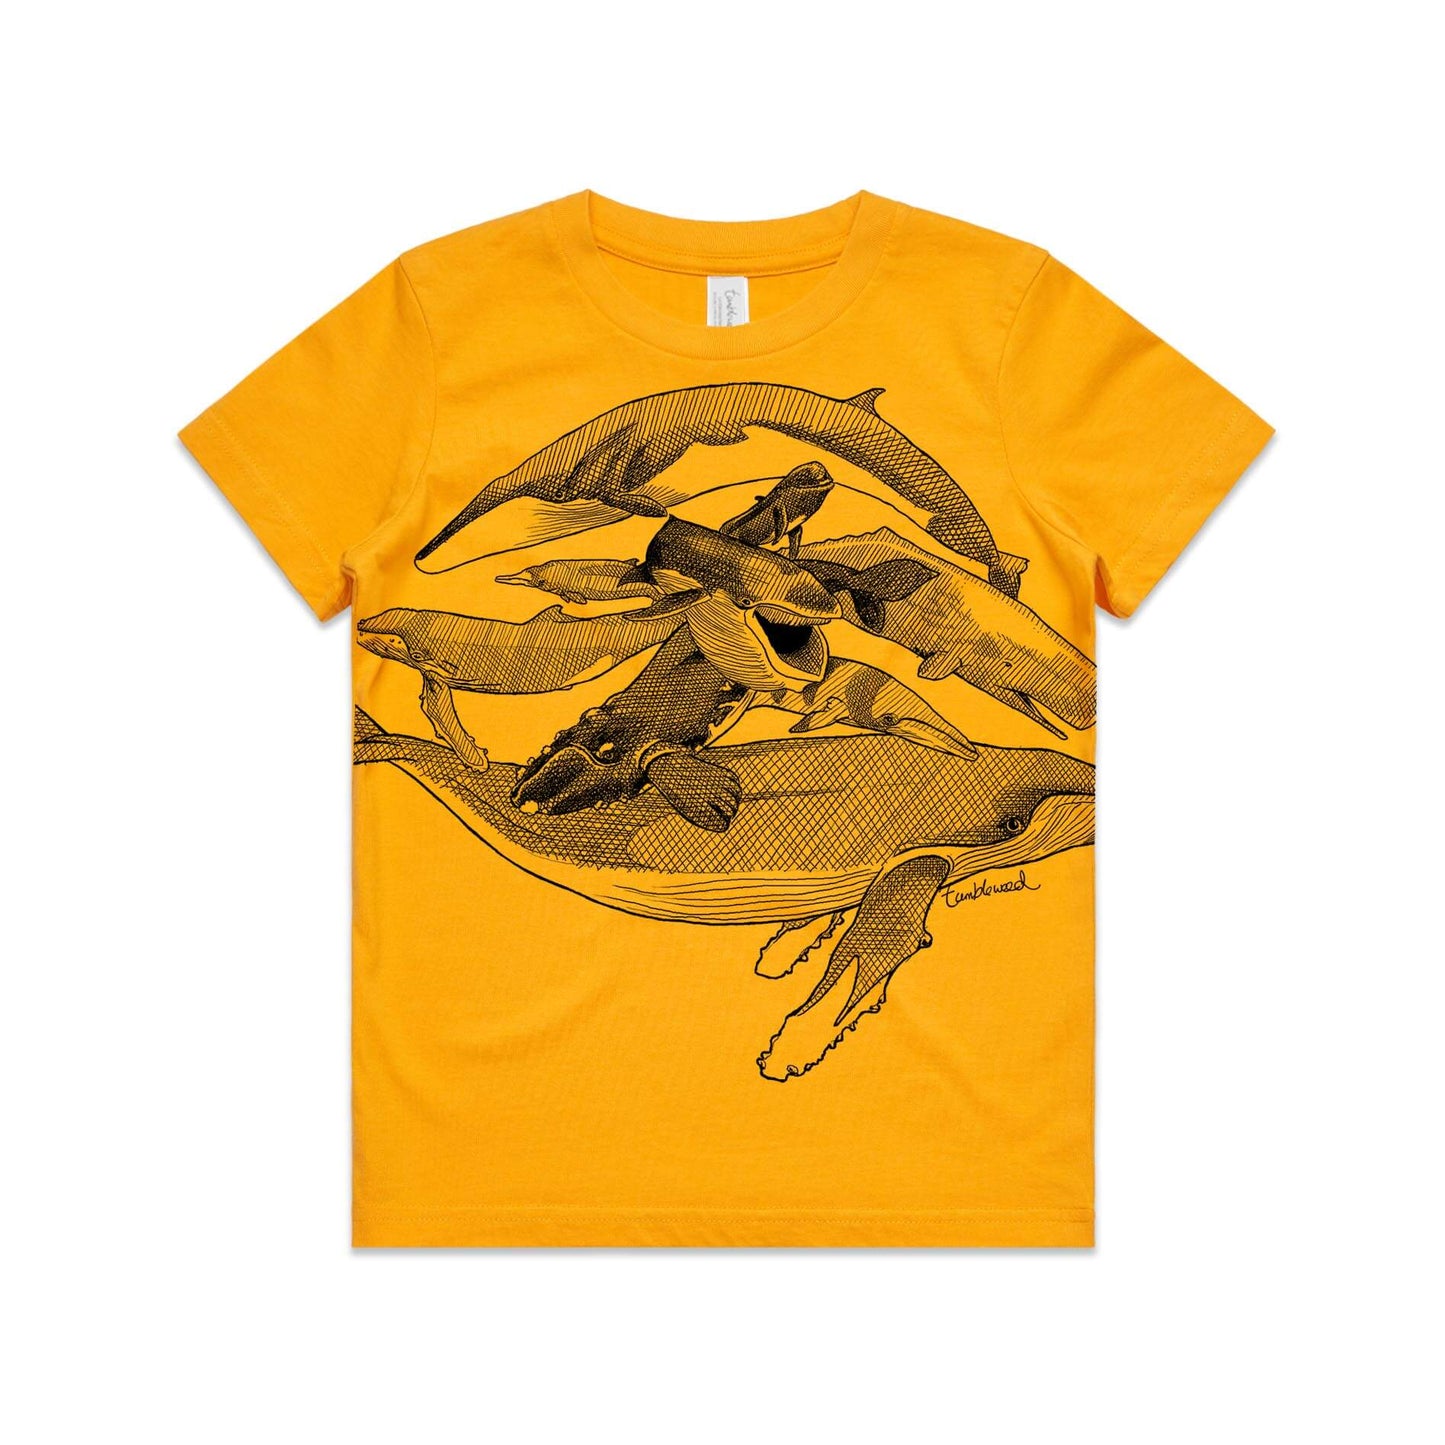 Gold, cotton kids' t-shirt with screen printed Kids whales design.